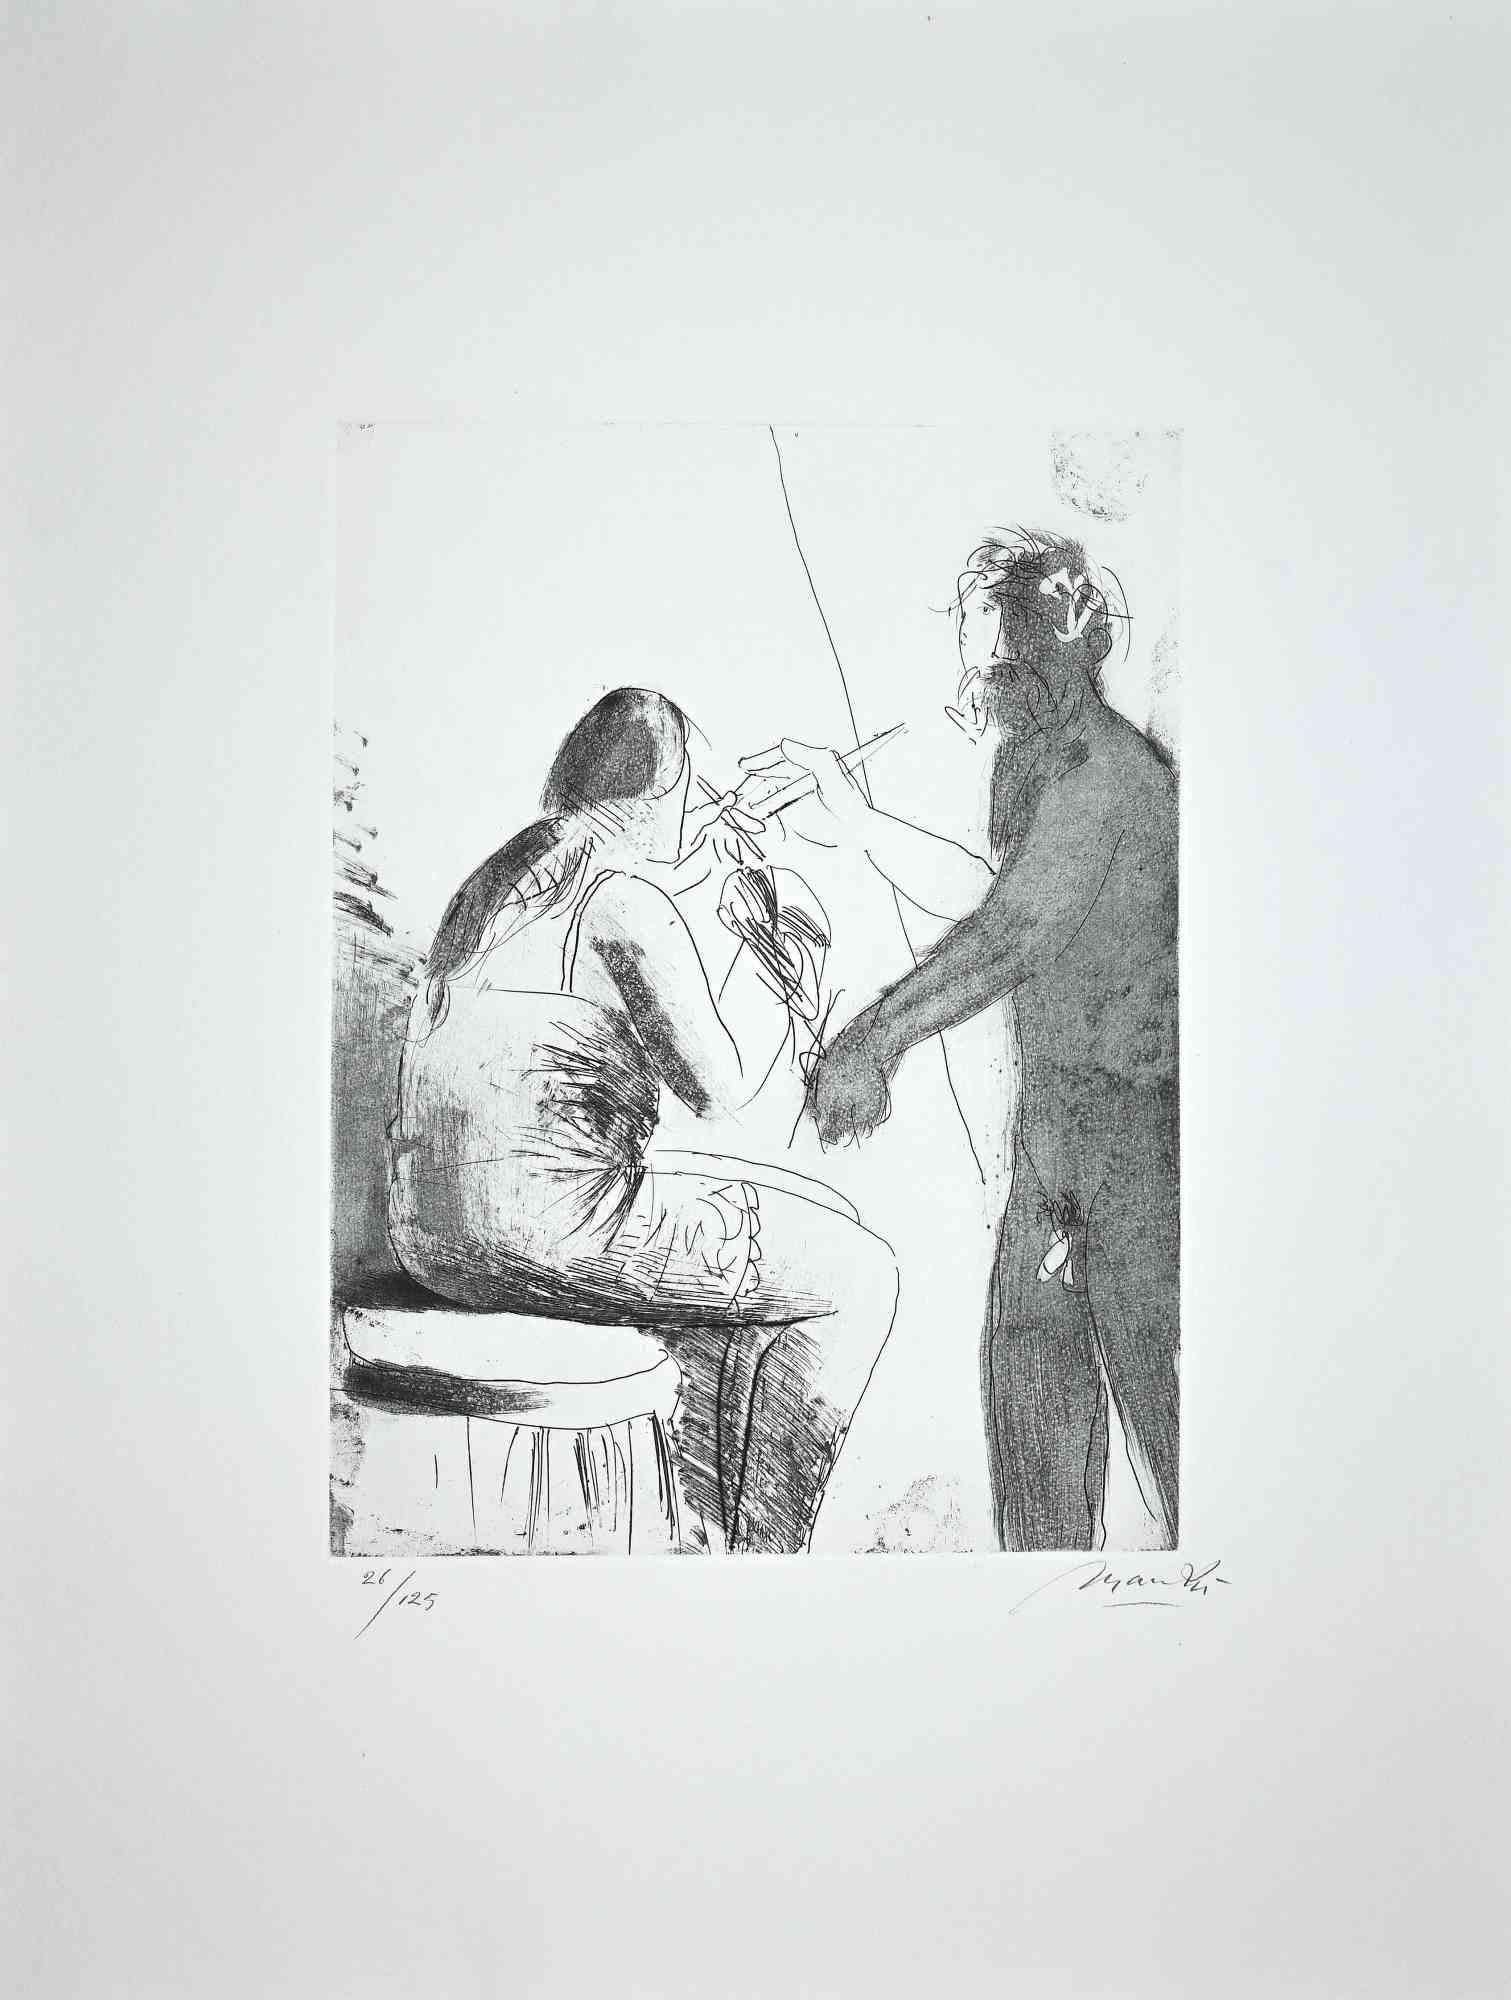 In the Atelier - Etching by Giacomo Manzù - 1968